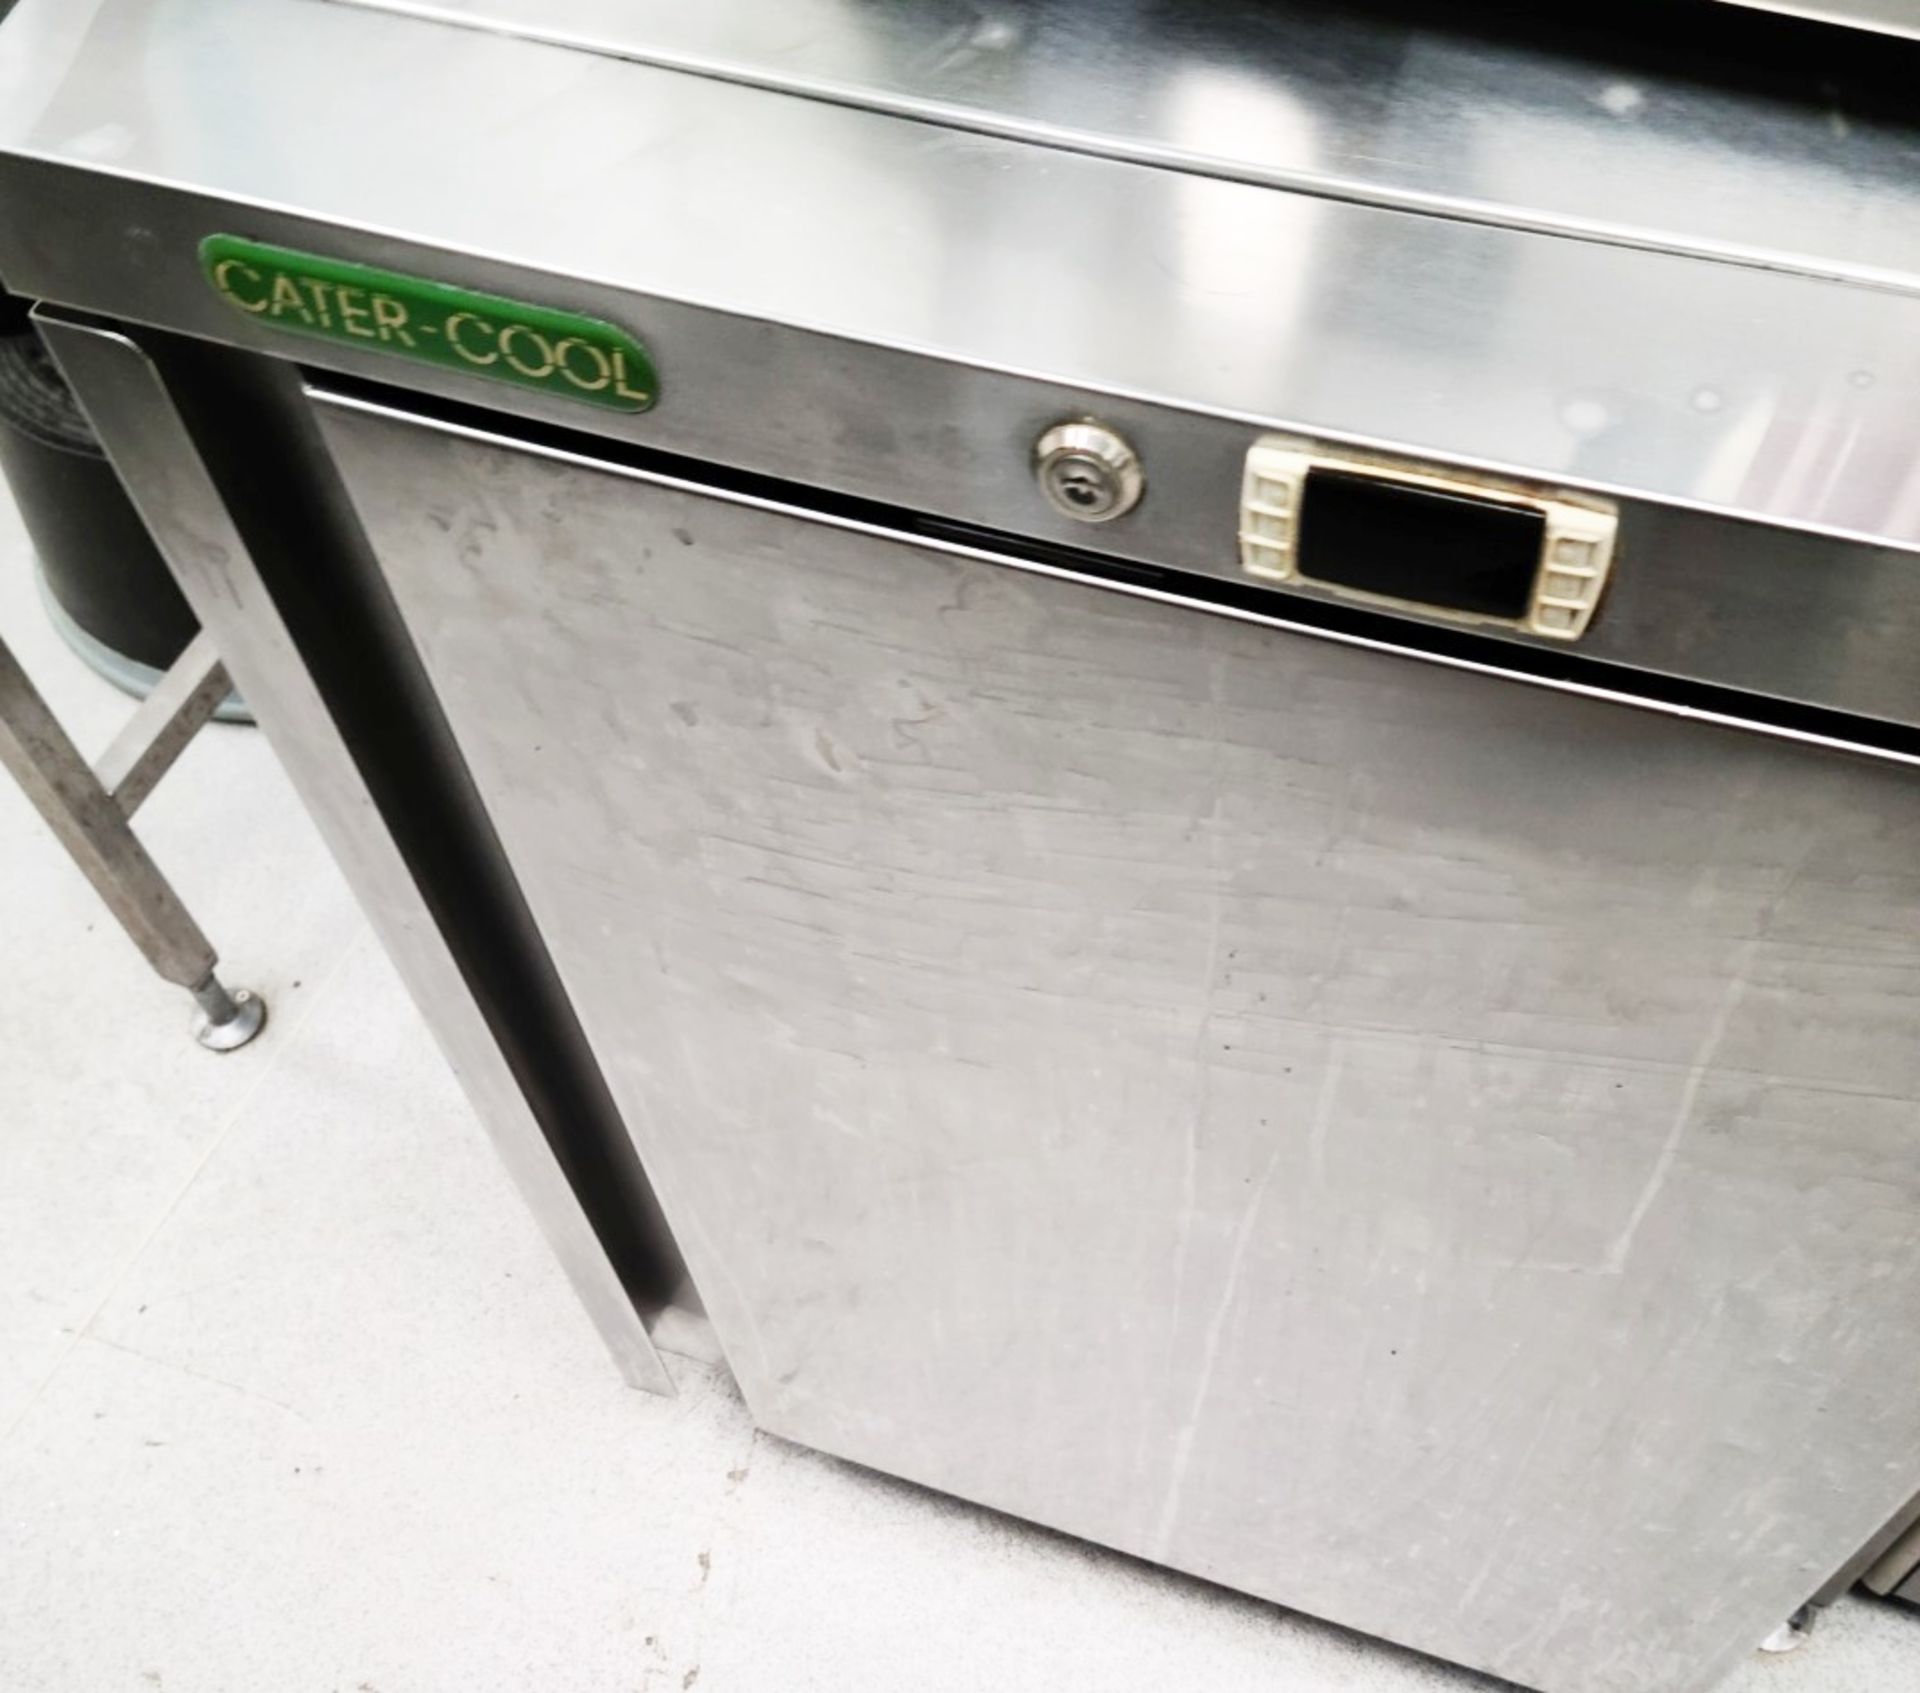 1 x CATER-COOL CK200RSS 170 Litre Under Counter Fridge With Stainless Steel Exterior - Image 5 of 6